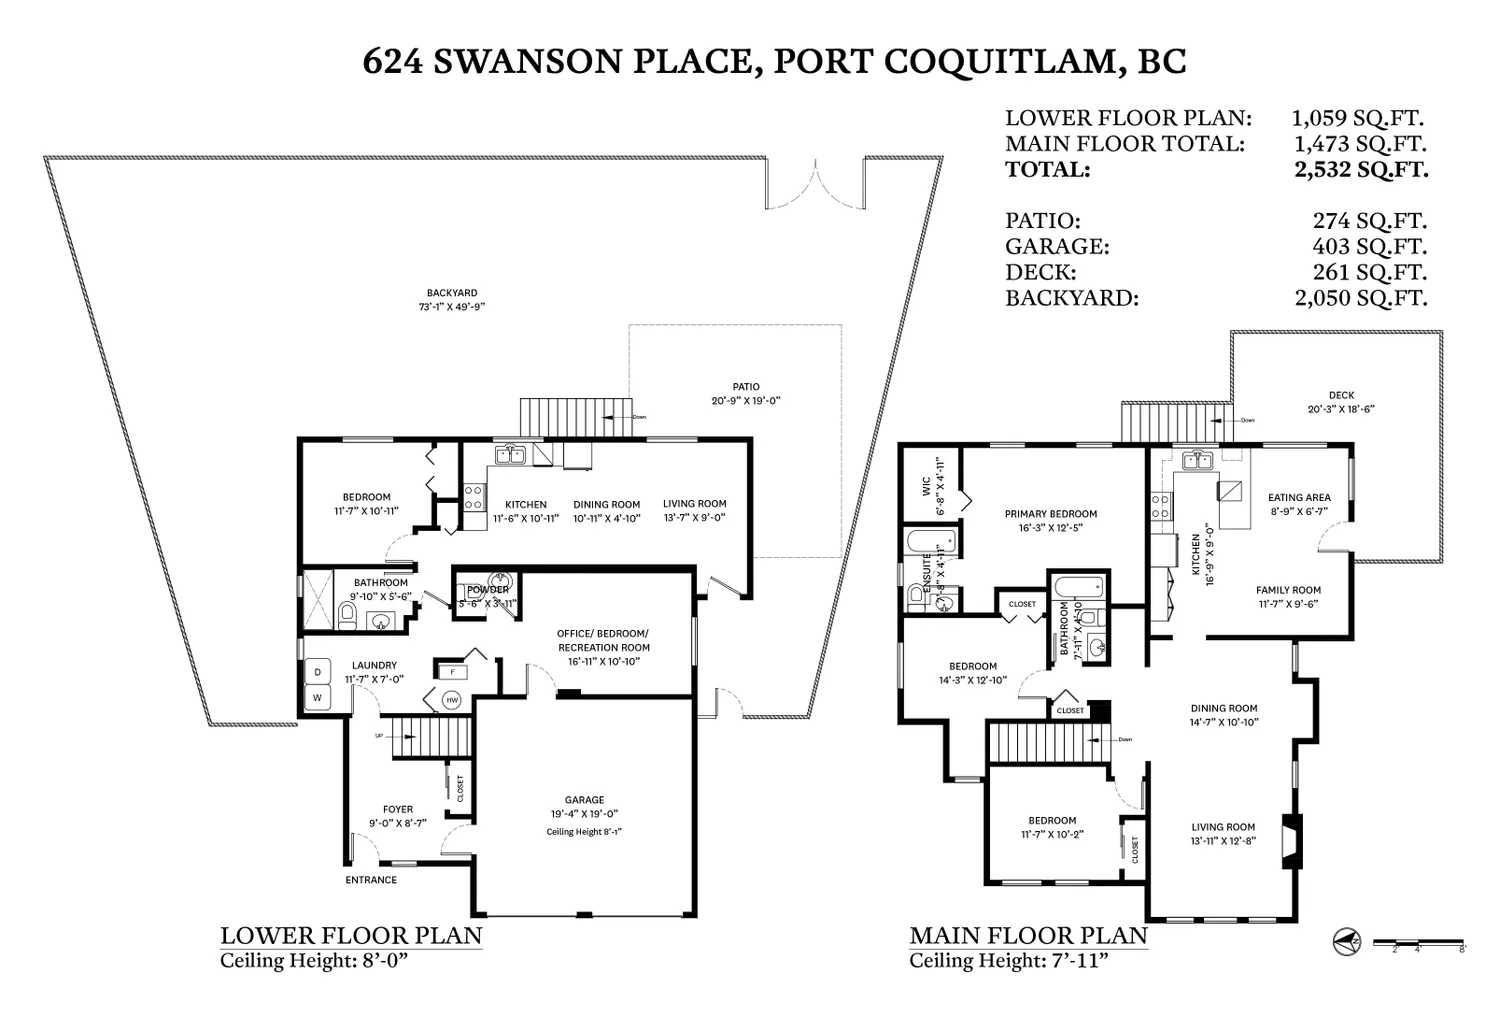 Dom w Port Coquitlam, 624 Swanson Place 10214622